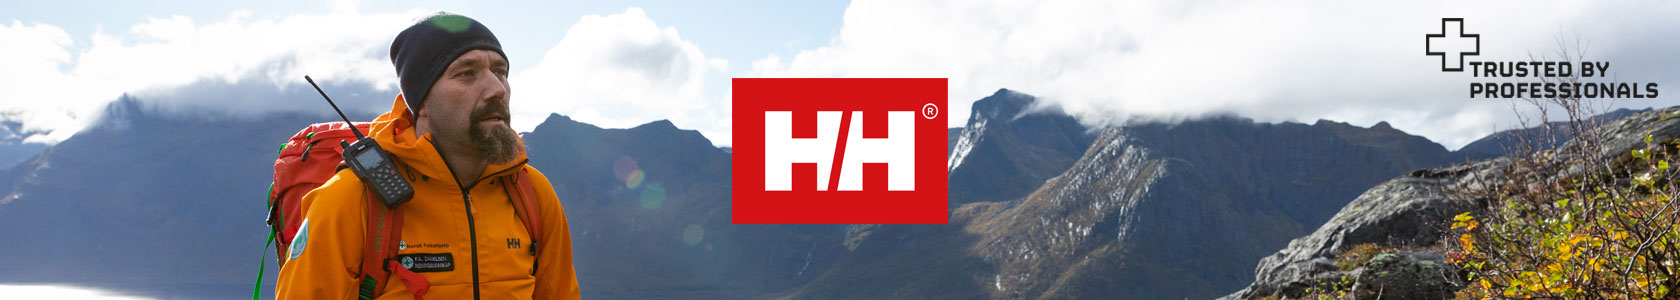 A man wearing a orange Helly Hansen jacket, a scenery of mountains touching the clouds and the Helly Hansen logo in the centre